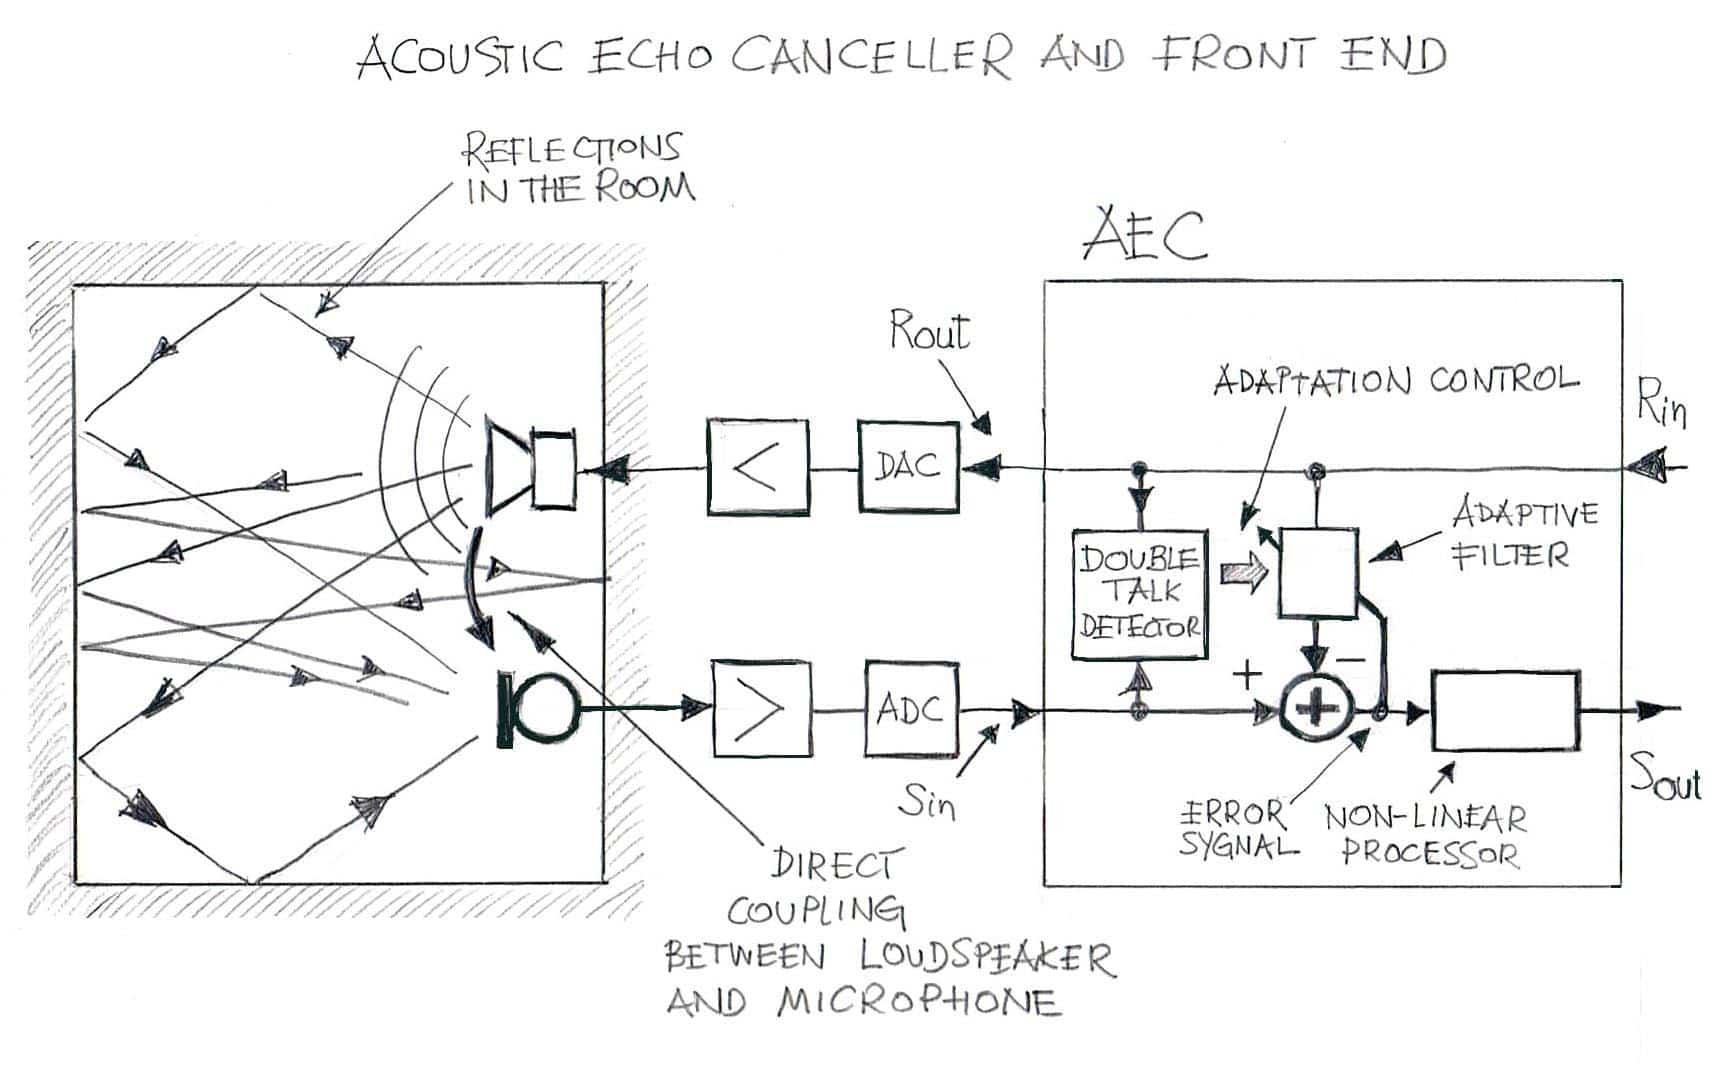 reset acoustic echo cancellation